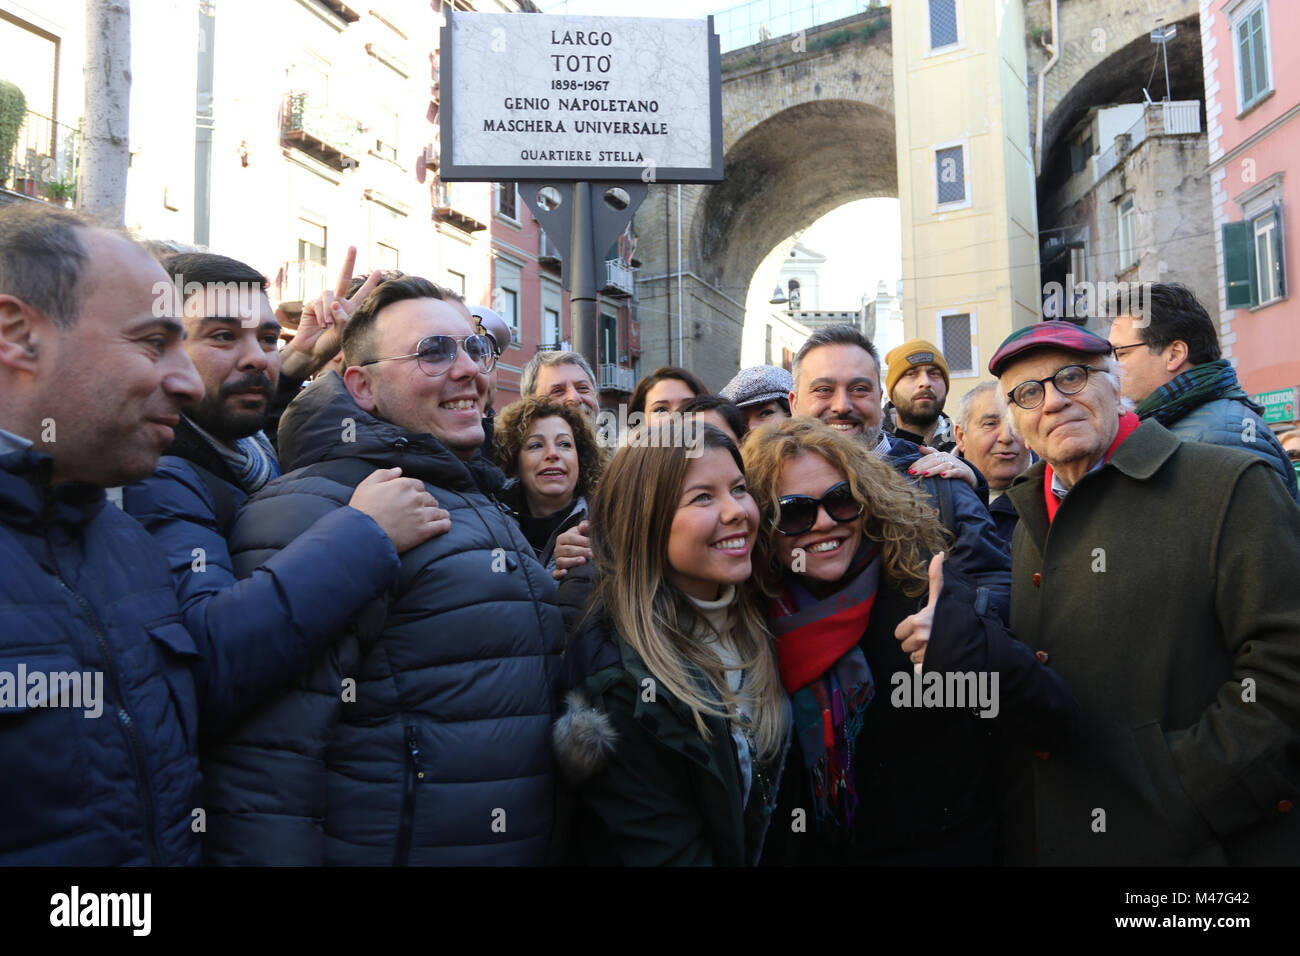 February 15, 2018 - This morning, in the heart of the SanitÃ  district, Largo TotÃ² opens in the square dedicated to Antonio De Curtis to celebrate the 120th anniversary of his birth. In the presence of the mayor of Naples, Luigi De Magistris, the culture councilor Nino Daniele and the president of the council of the third municipality, a plaque entitled to the prince of laughter was discovered among the applause. Also the nephews of TotÃ² were present. who celebrated his memory with a moving participation. A memory always alive in the heart of the Neapolitans and neighborhood residents who st Stock Photo